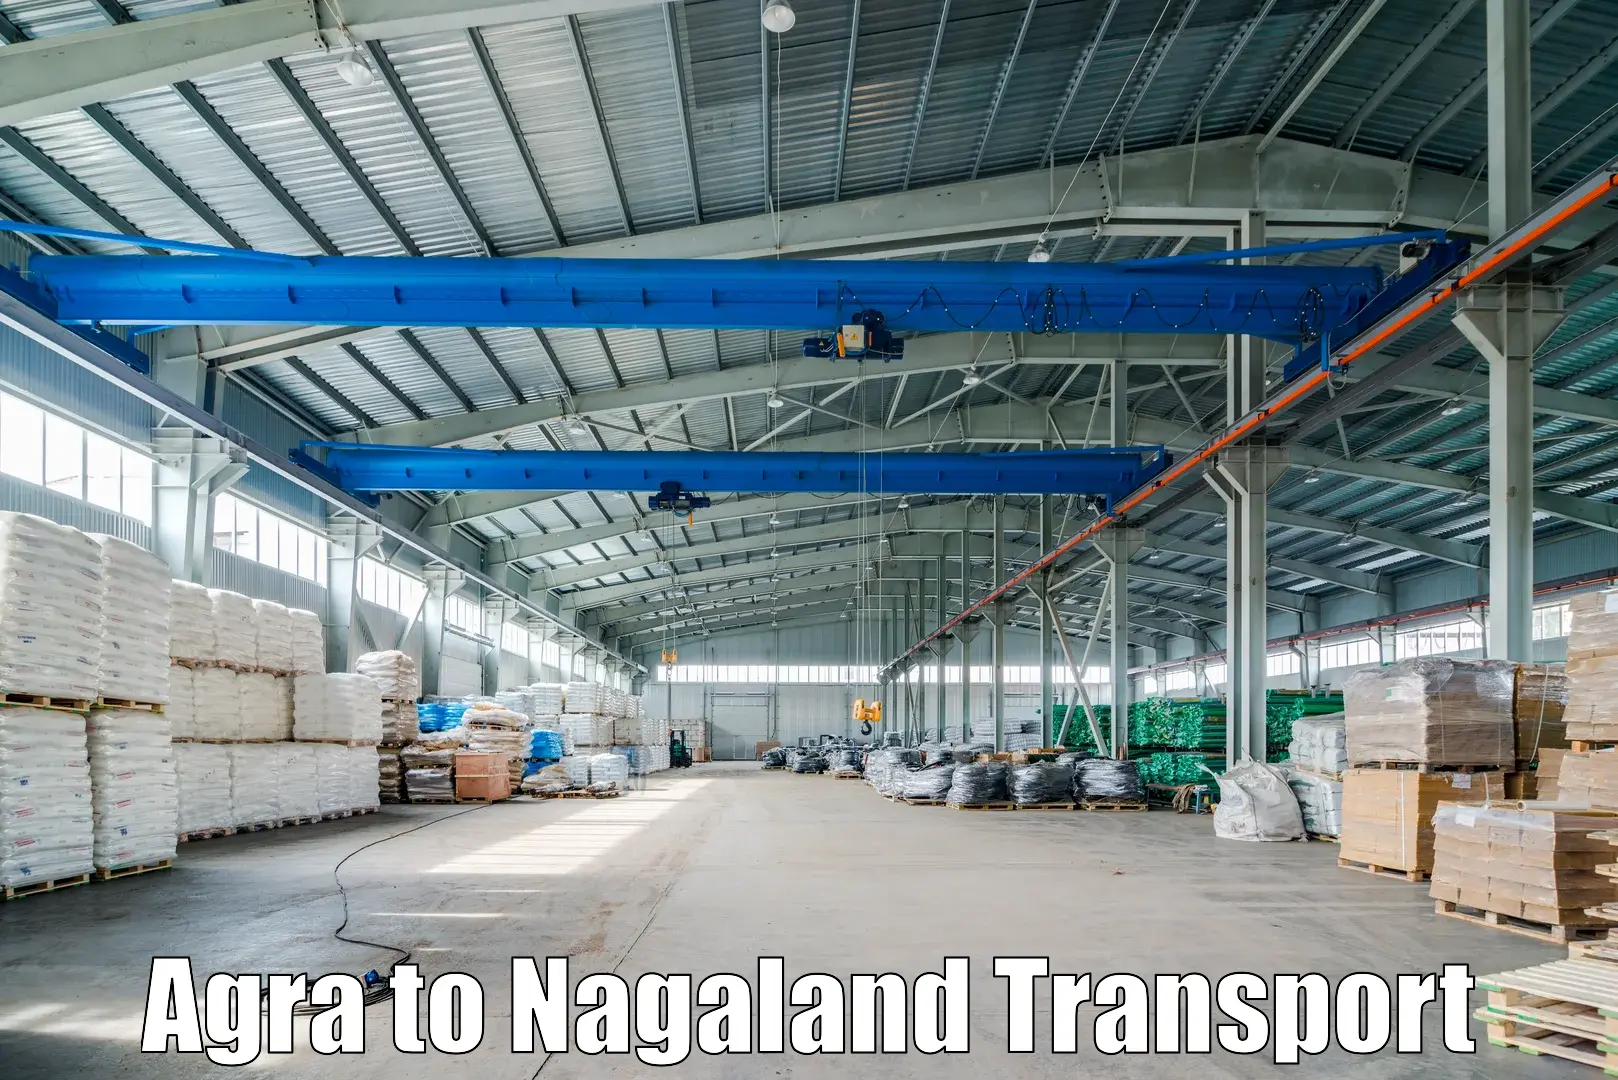 Nearby transport service Agra to Nagaland